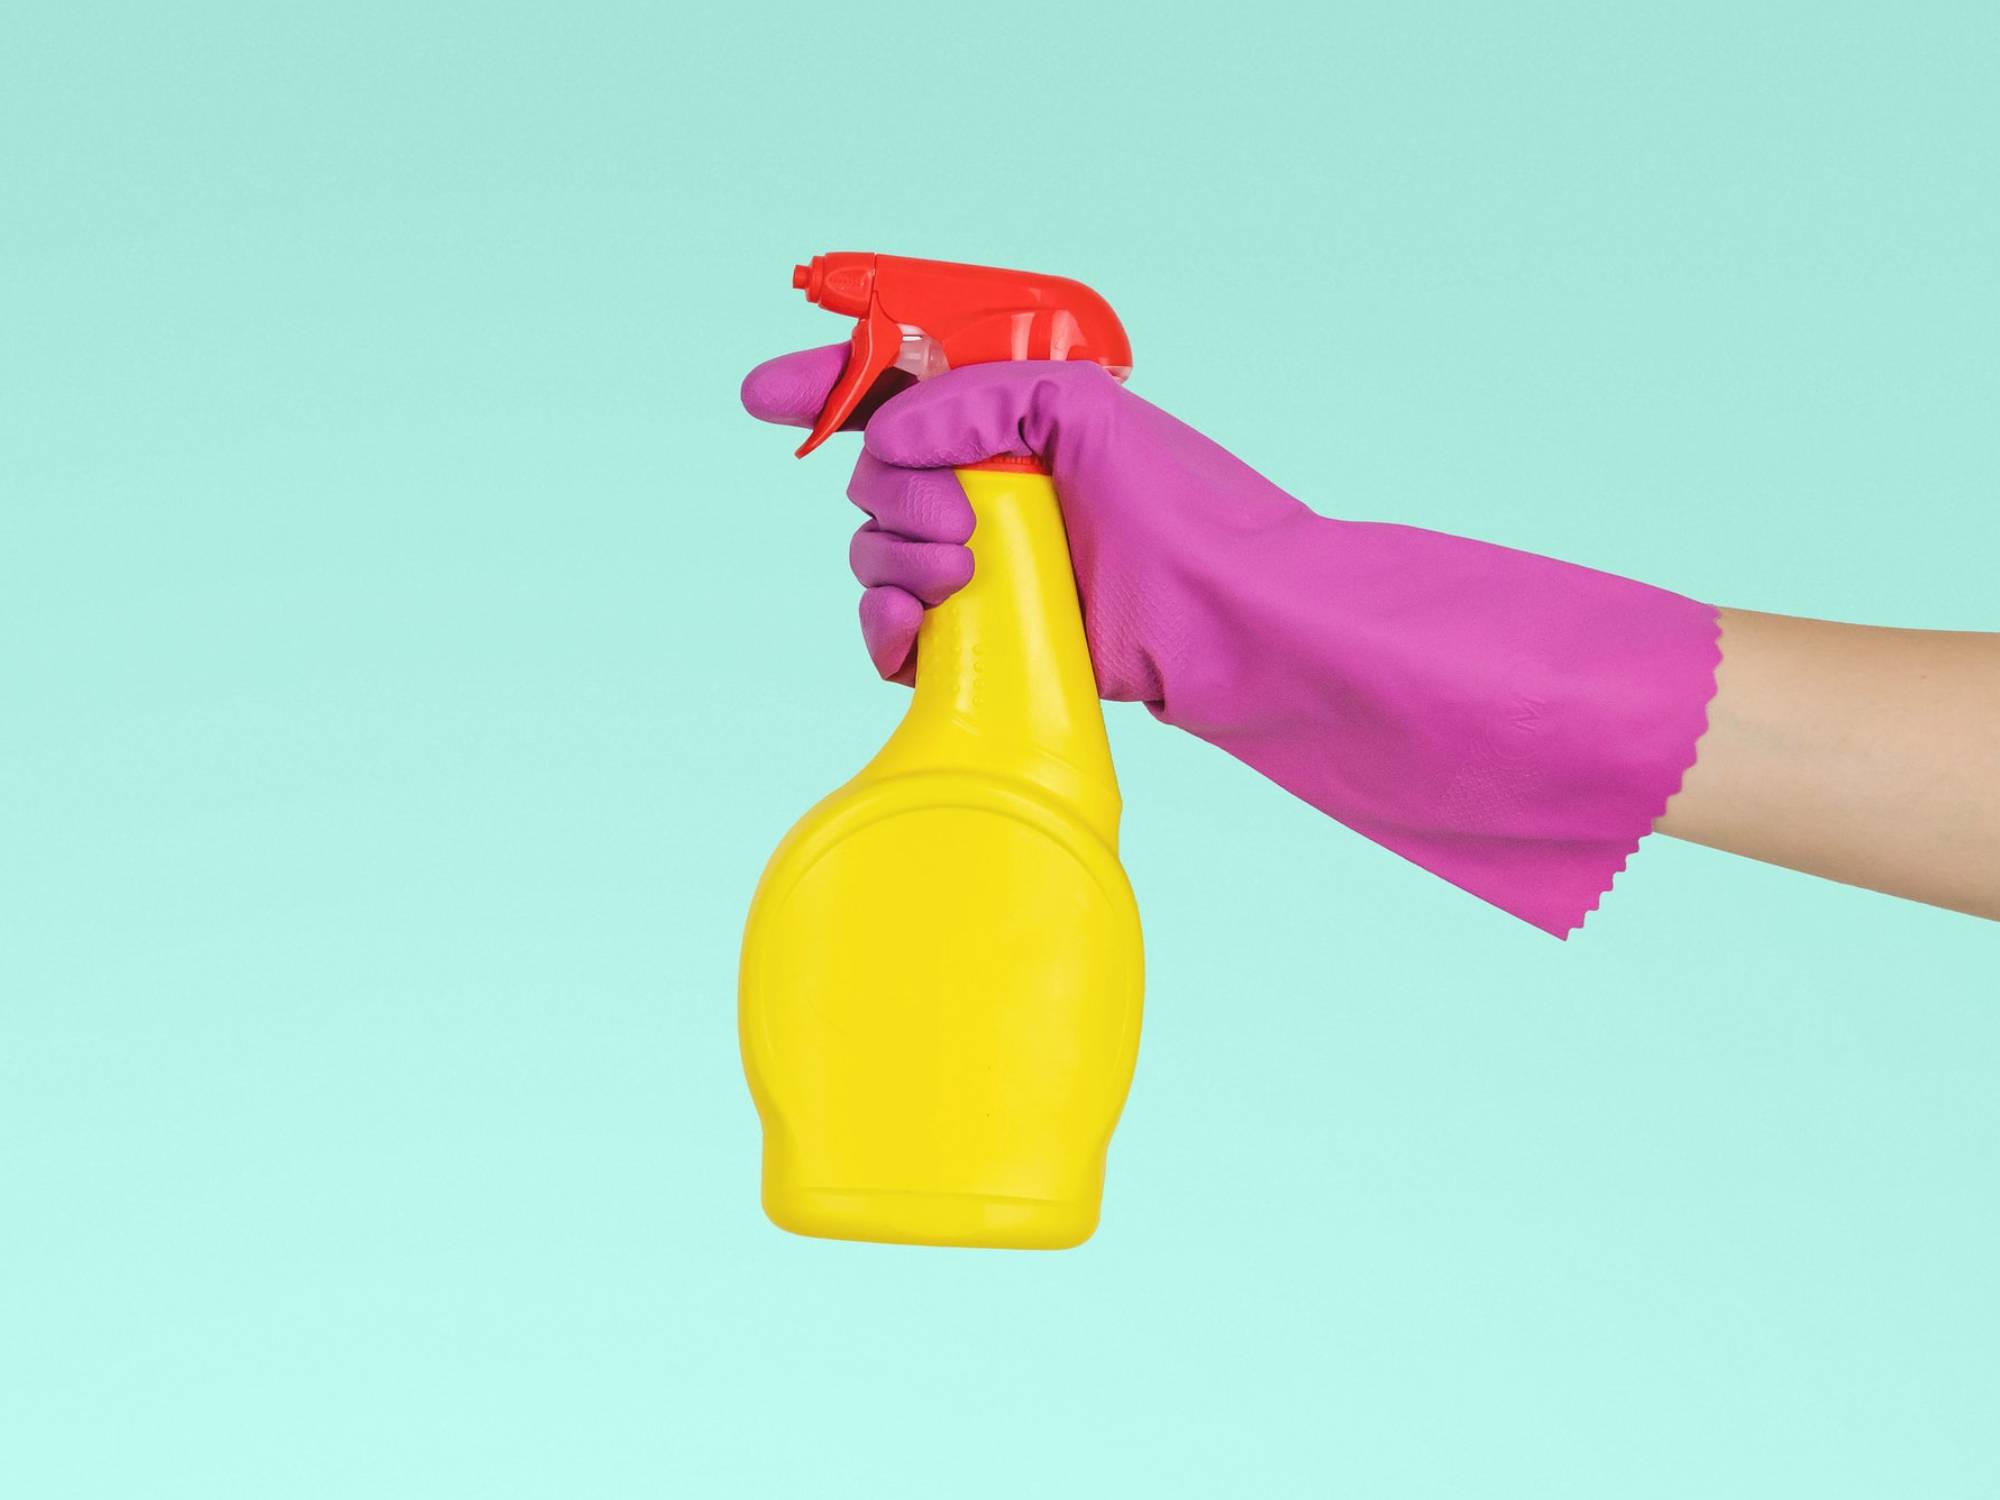 Hand in rubber gloves with a cleaning product sprayer